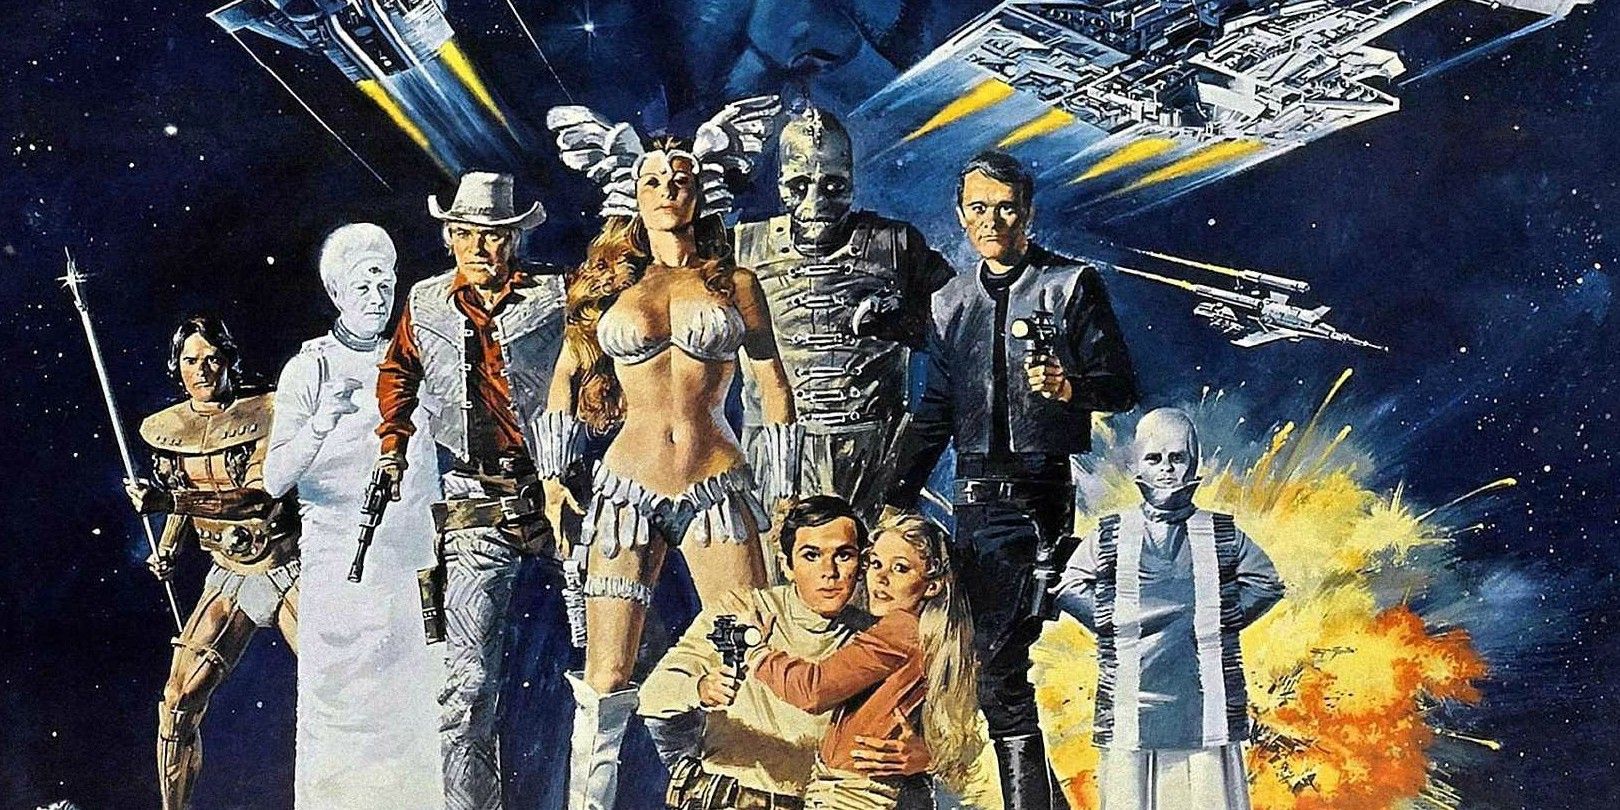 The main cast for the film &quot;Battle Beyond The Stars&quot;, standing in front of a vaguely retro-futurist backdrop